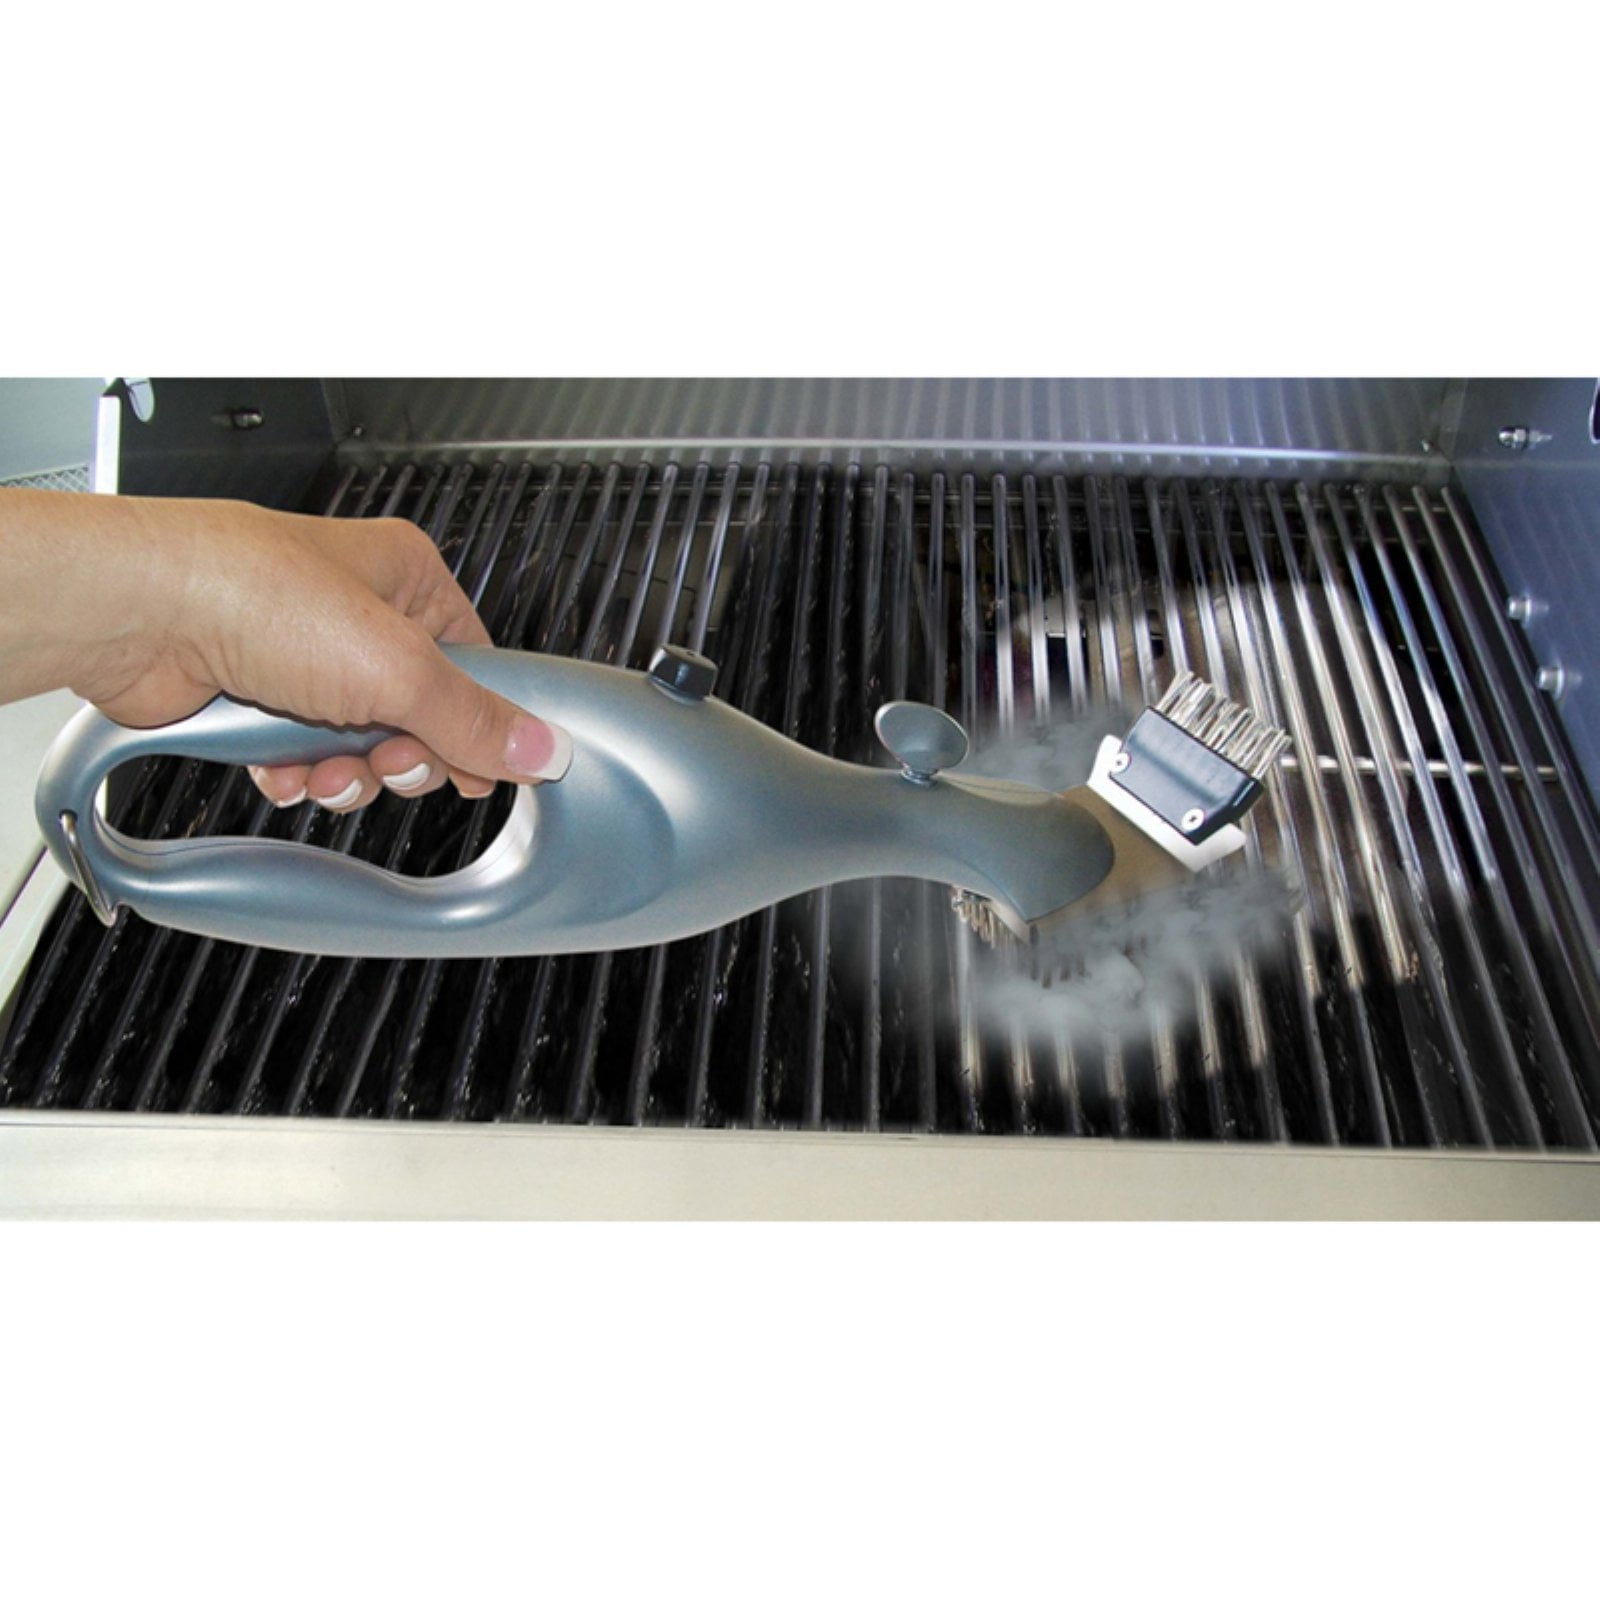 Steam Brush Cleaning Barbeque Grill For Charcoal Clean Tool Grill Daddy Original 